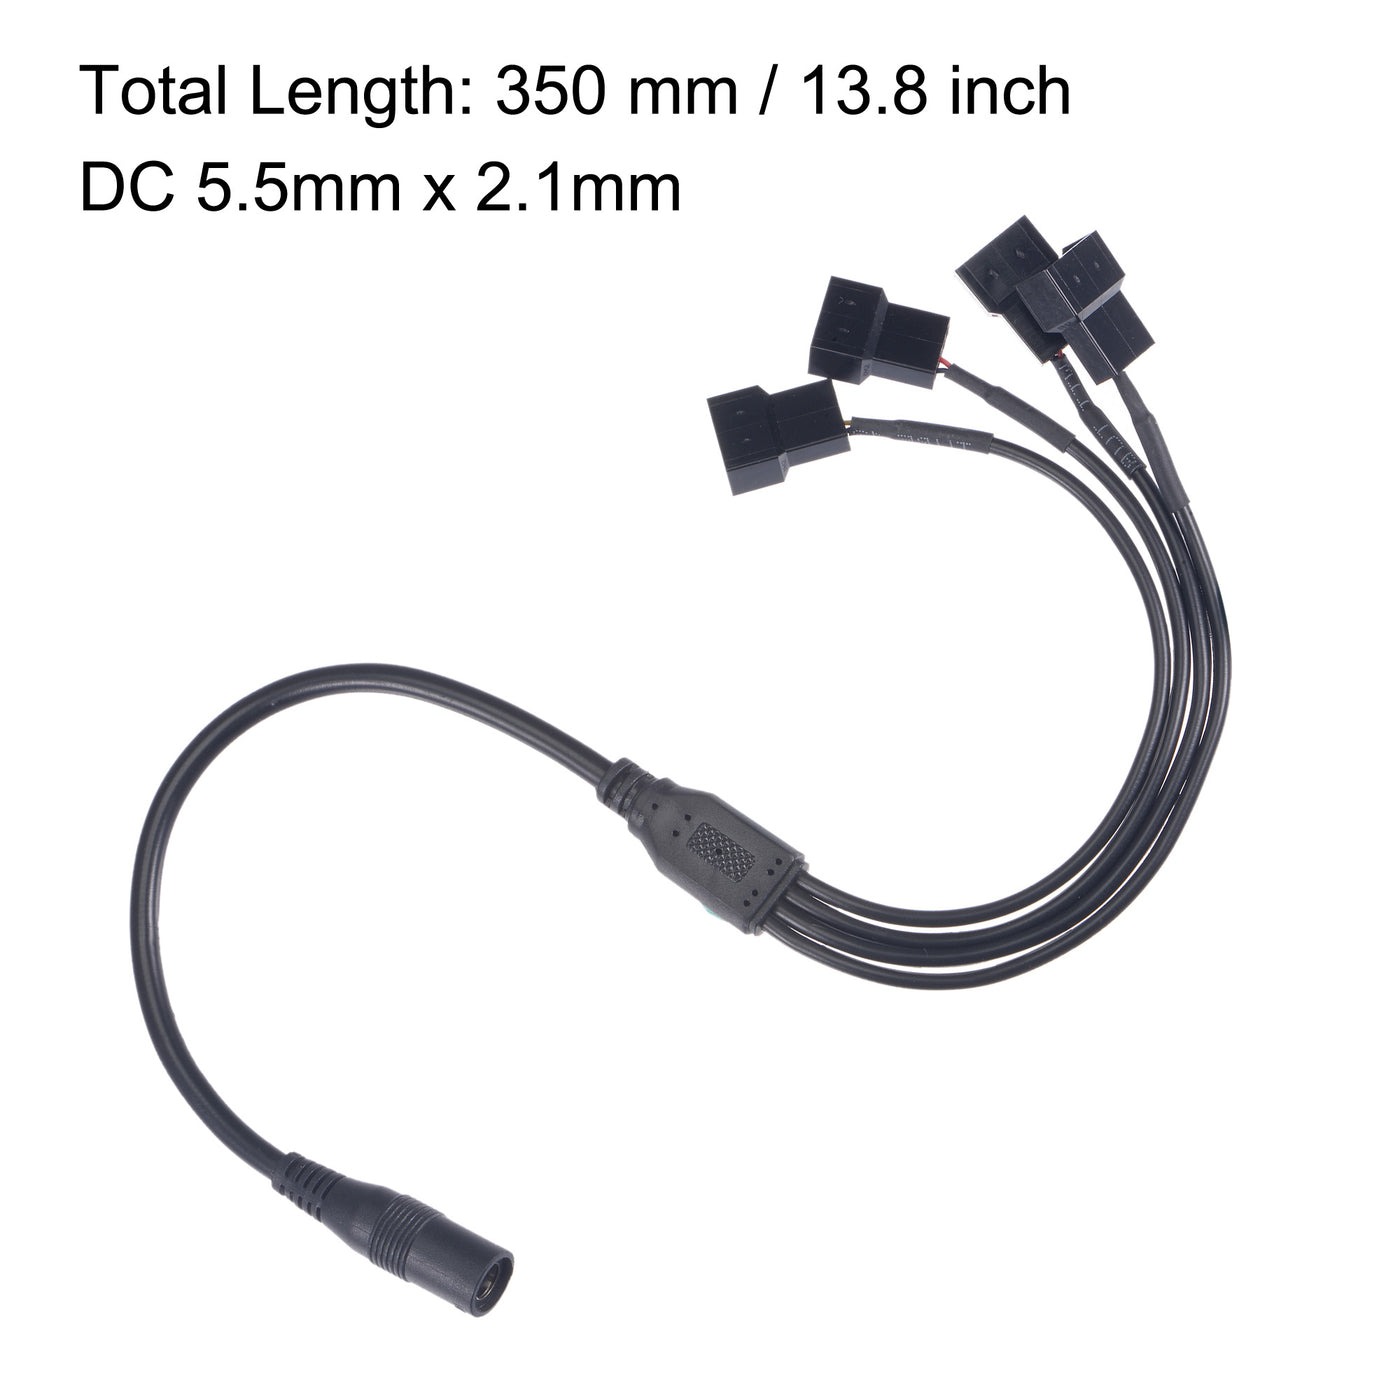 uxcell Uxcell Fan Power Supply Cable DC 5.5mmx2.1mm to 4 Port 3 Pin or 4 Pin Output 13.8 Inch